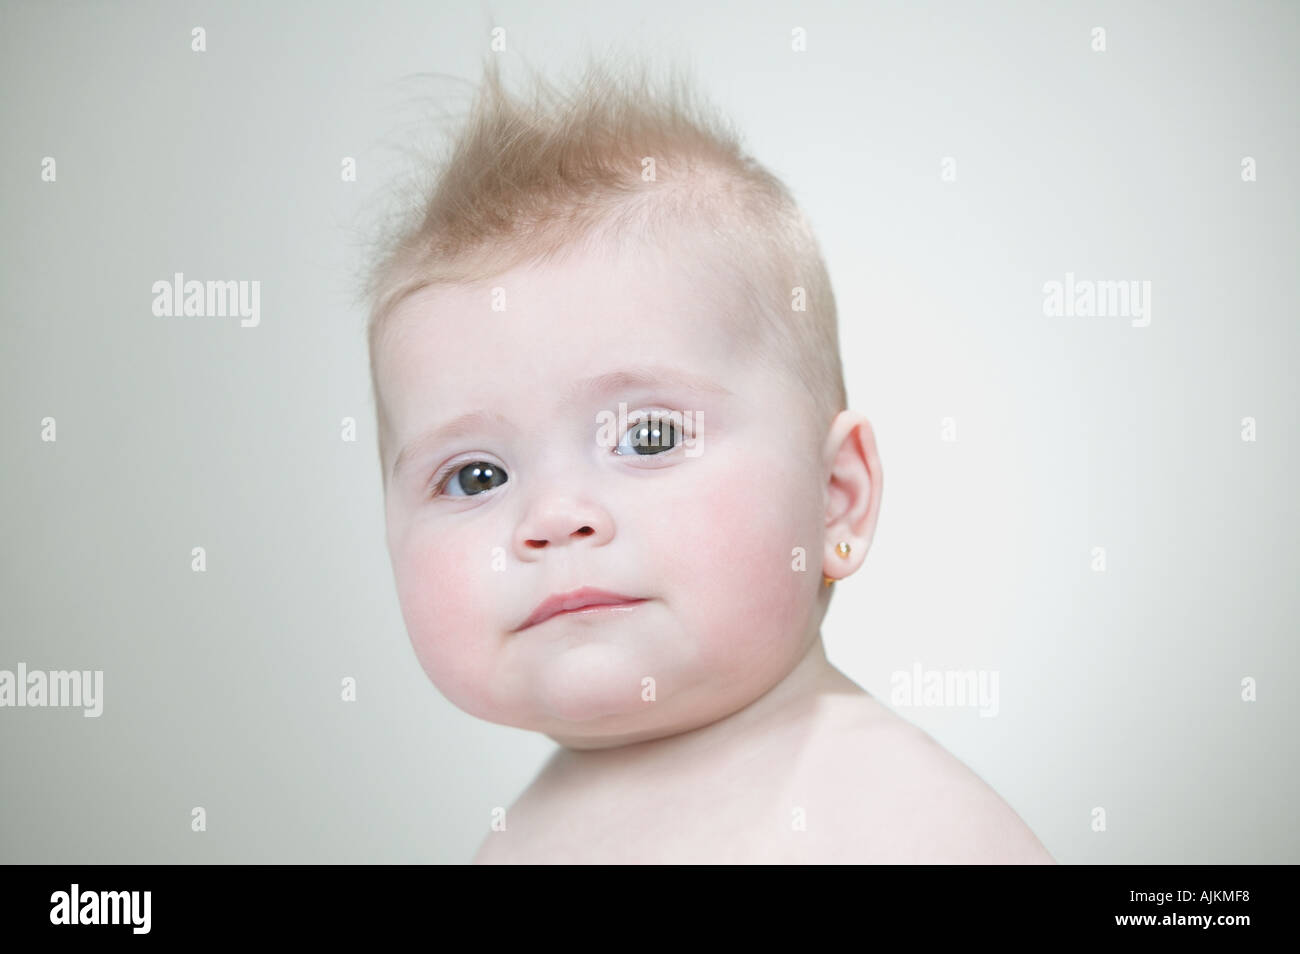 Baby Girl With Spiked Hair Stock Photo Alamy